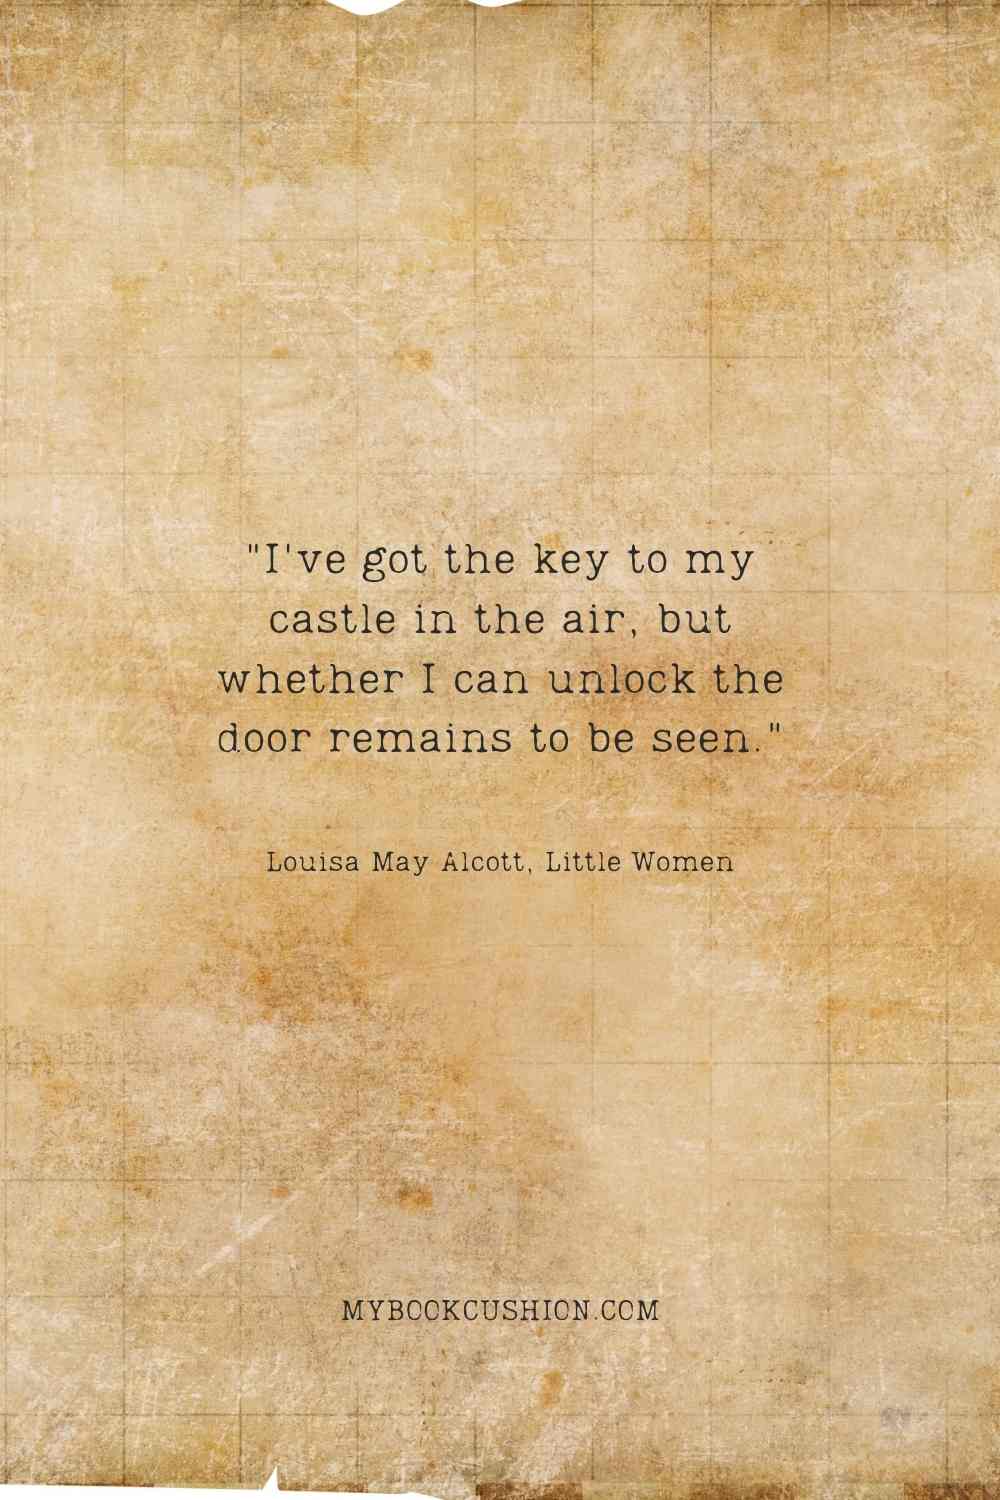 I've got the key to my castle in the air, but whether I can unlock the door remains to be seen. - Louisa May Alcott, Little Women